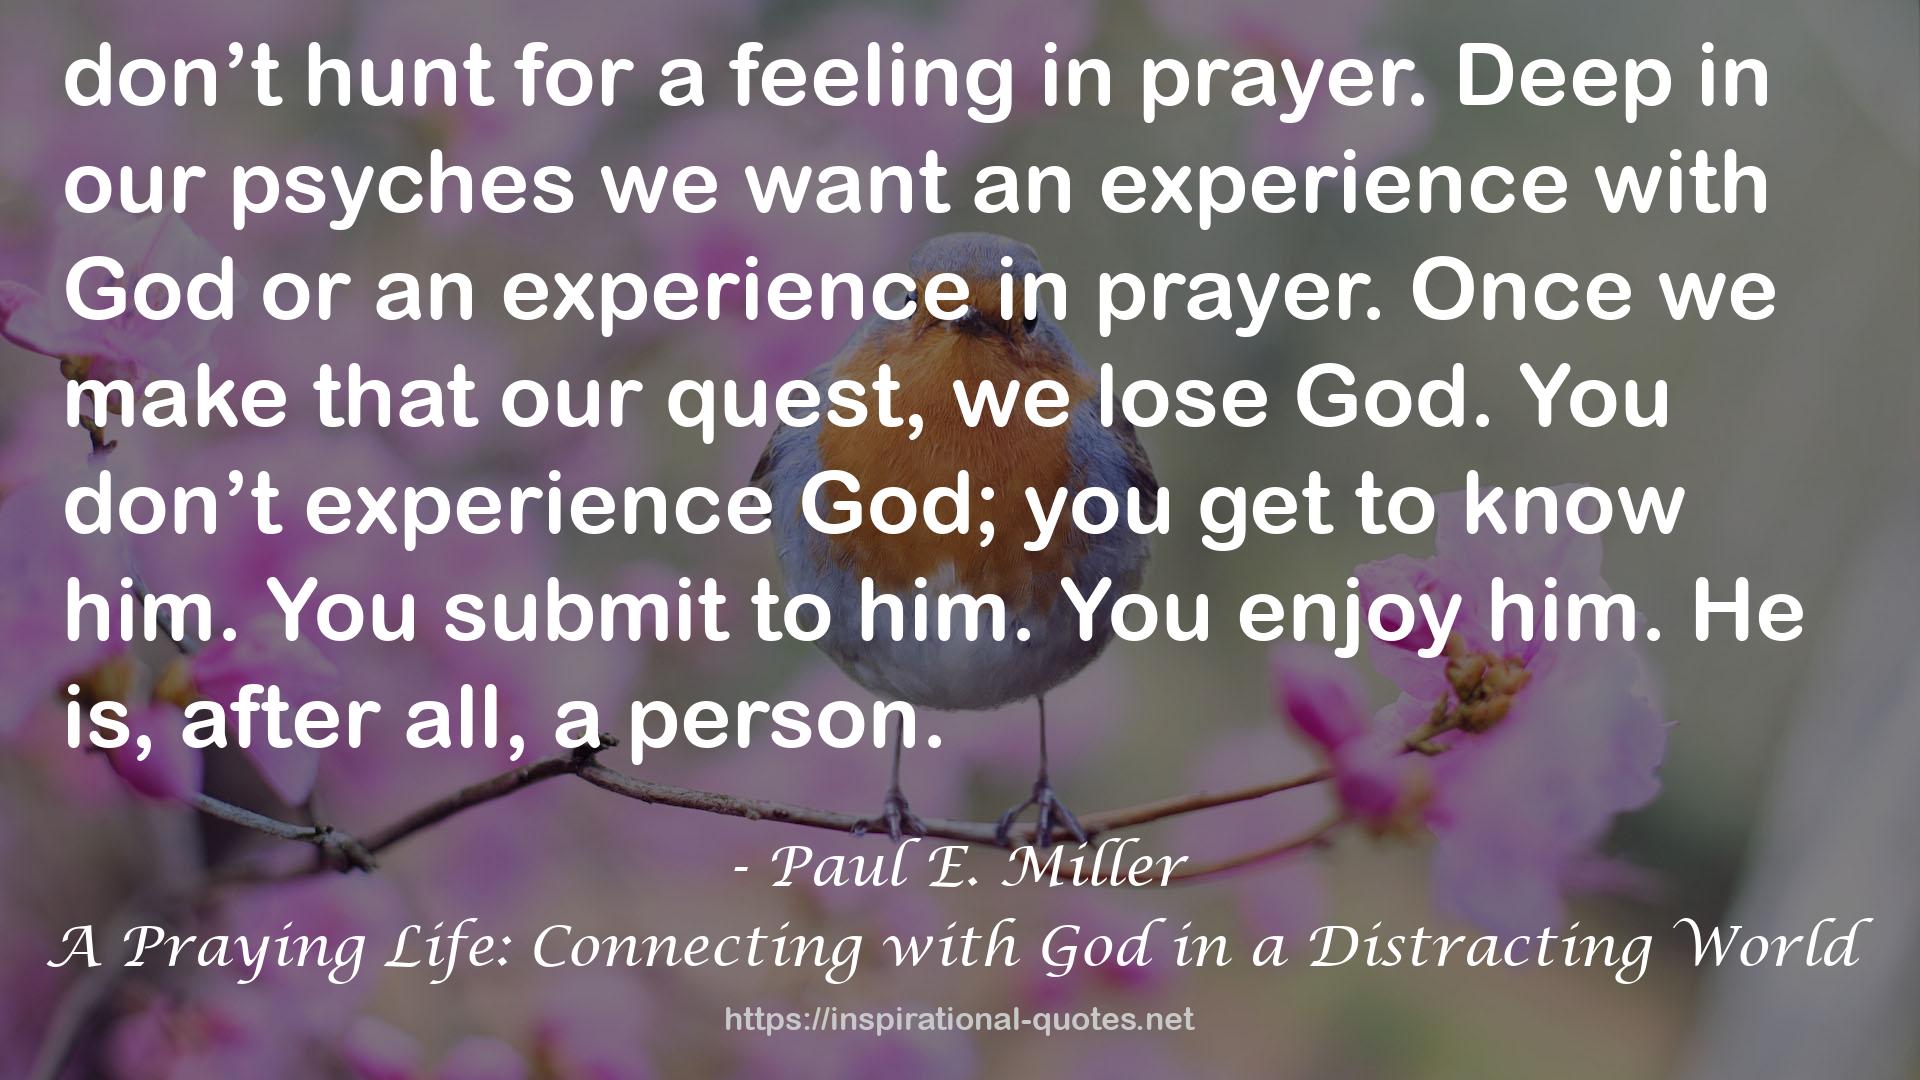 A Praying Life: Connecting with God in a Distracting World QUOTES